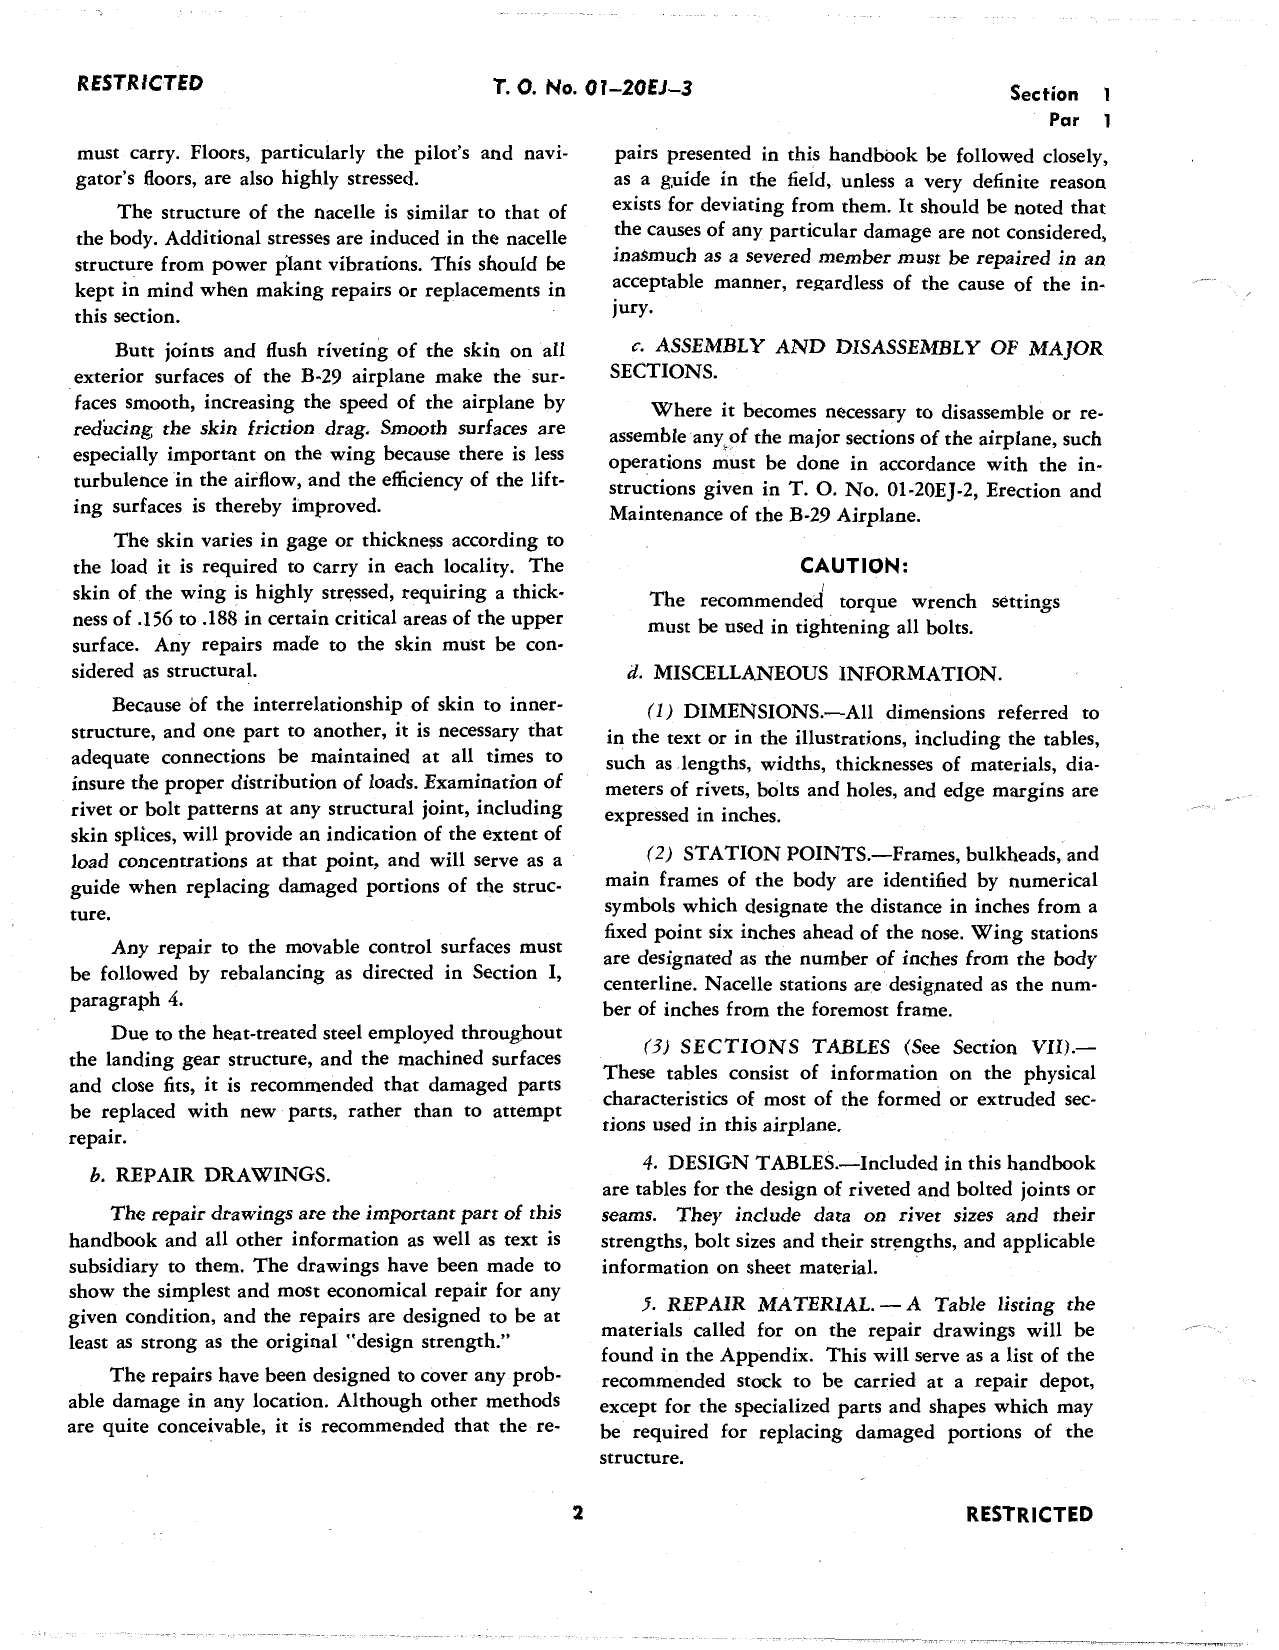 Sample page 22 from AirCorps Library document: Structural Repair Instructions for Army Model B-29 Airplane